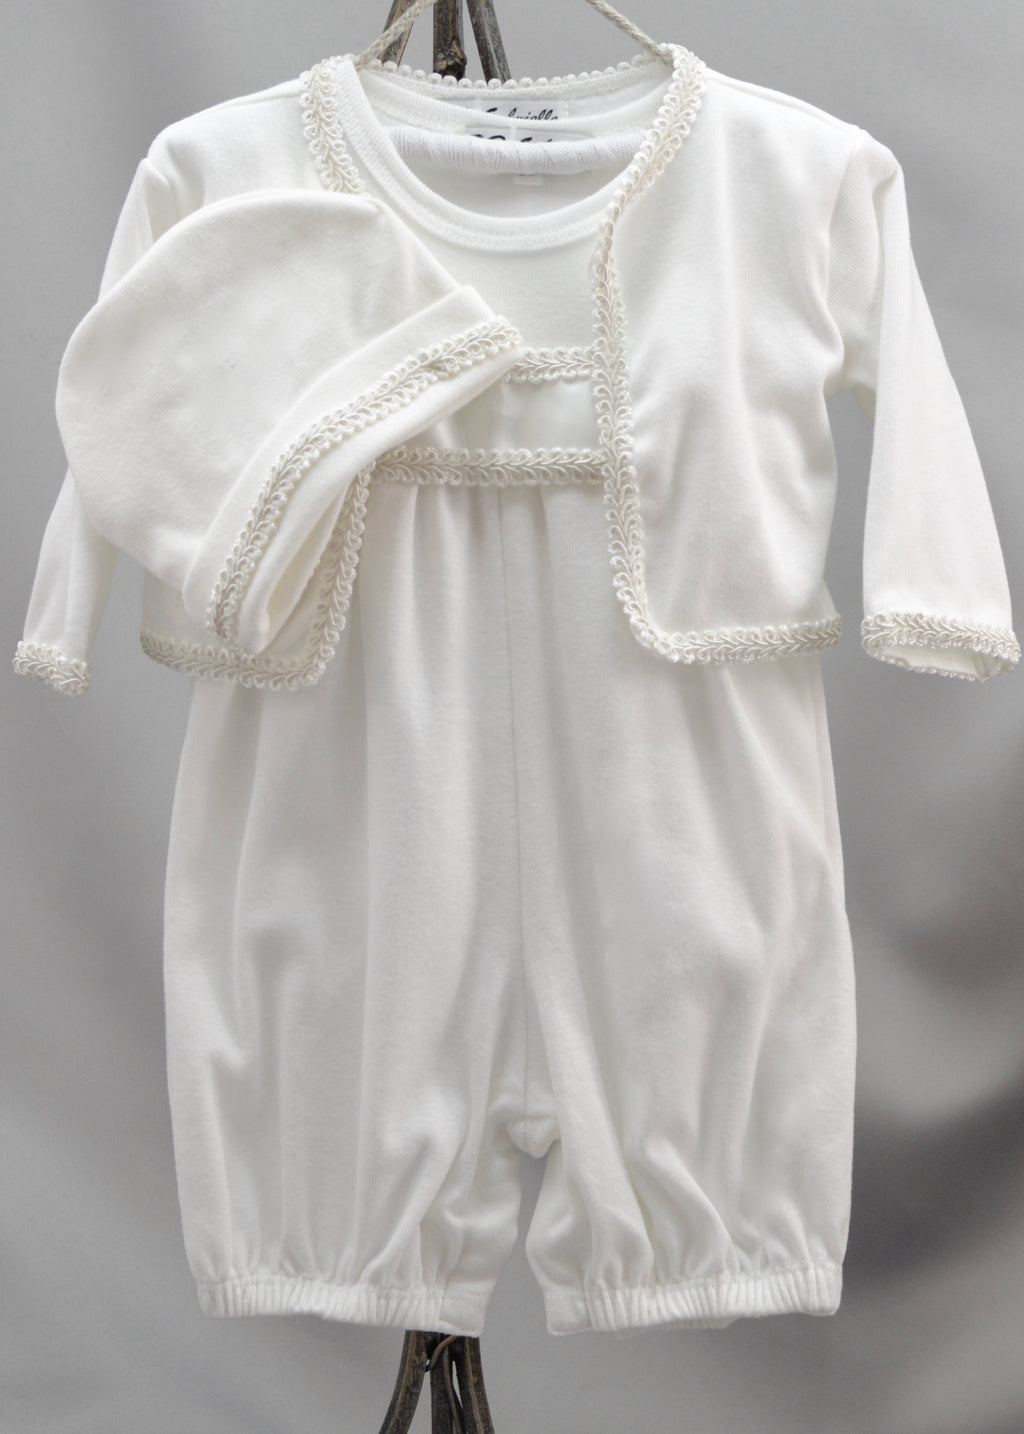 Lambros Baptismal Outfit | 6 Months